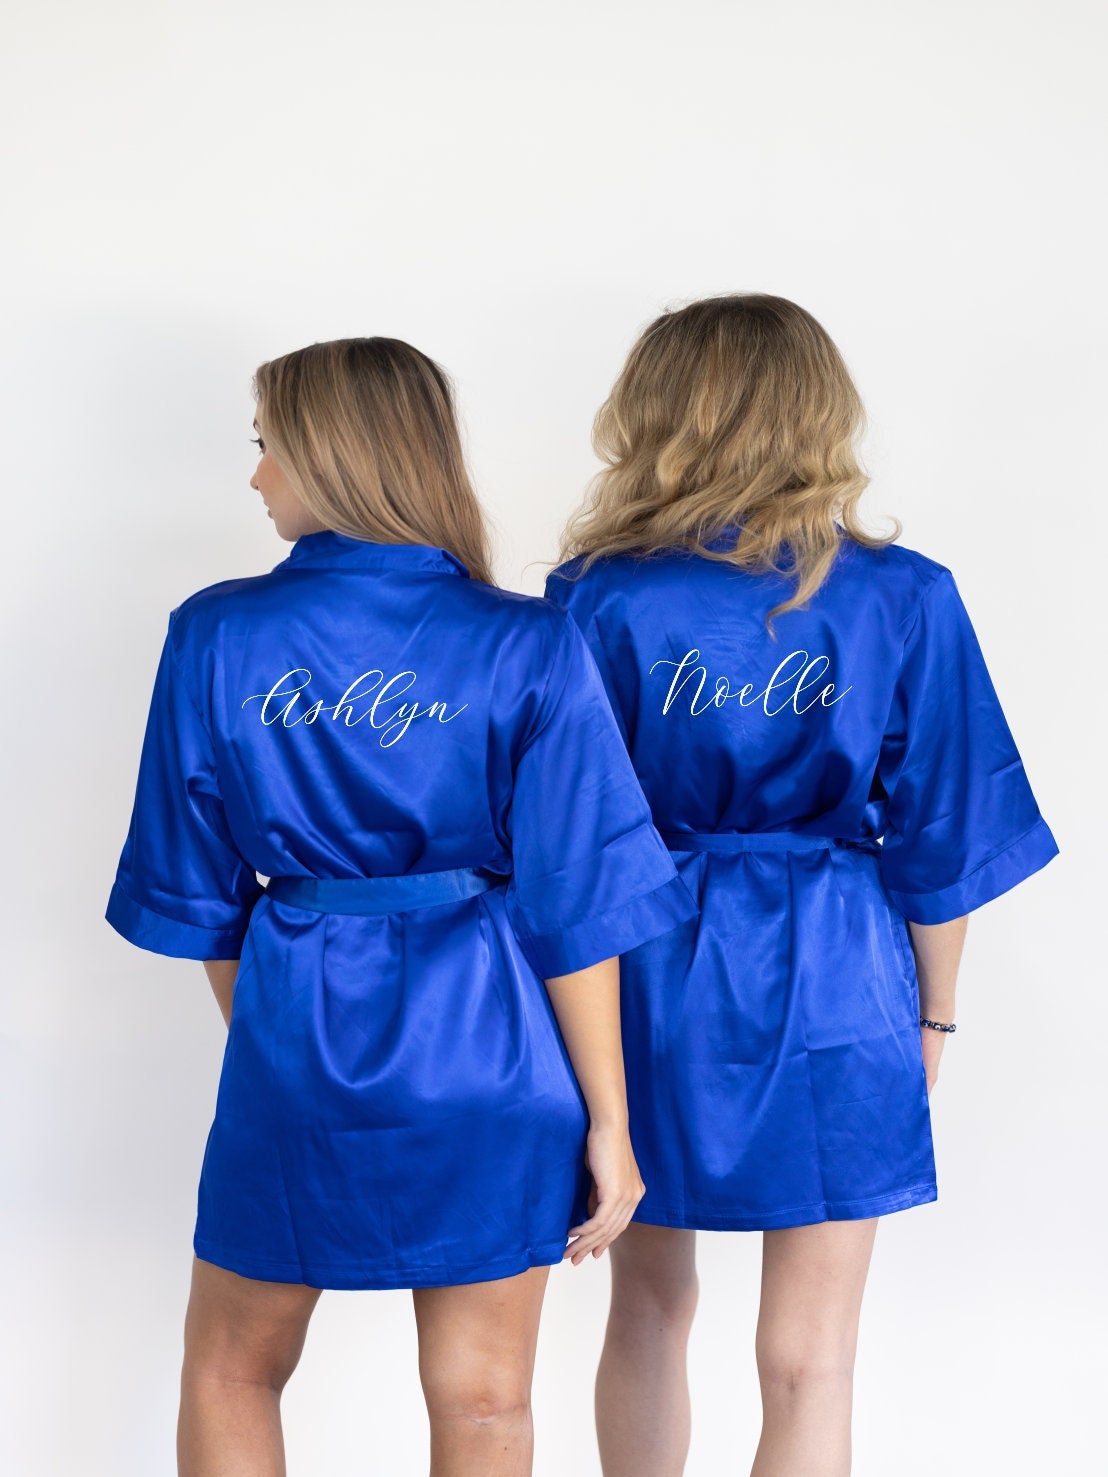 Dusty Blue Robes Personalized Lace Trim Satin Robe Silky Bridesmaid Robes  Wedding Bridesmaid Gift Bridal Party Robes Satin Robes - Robes - AliExpress